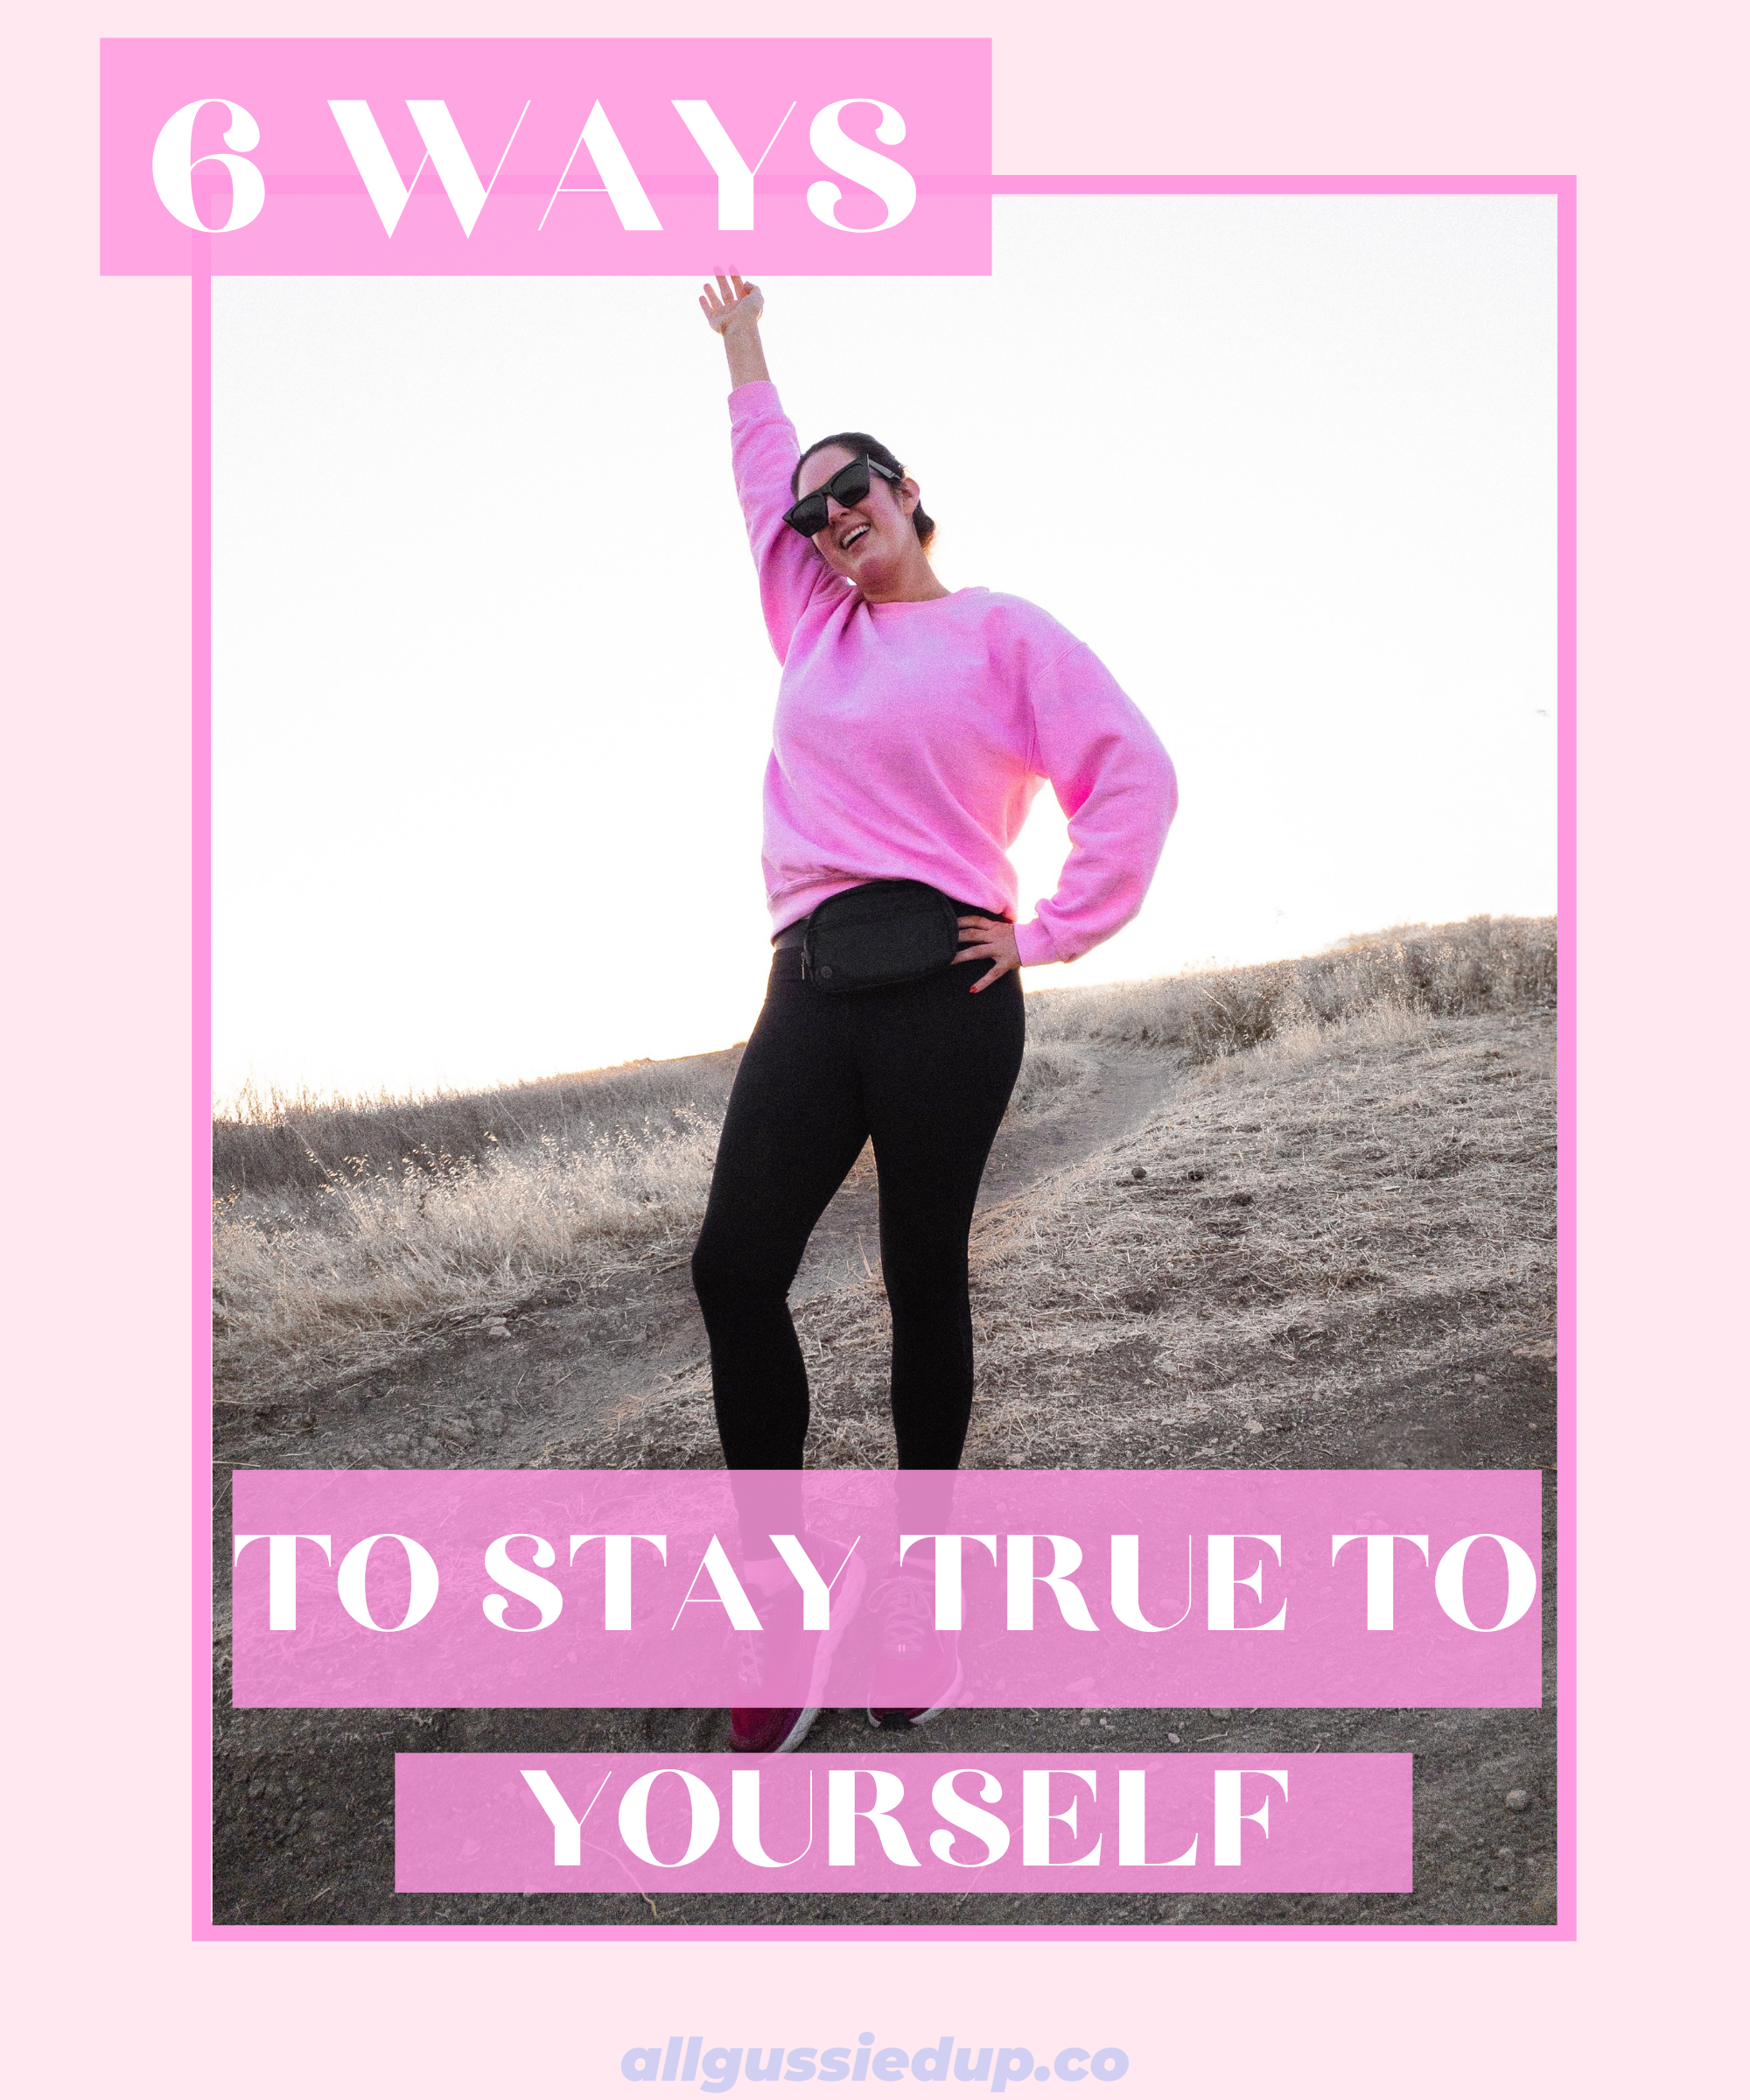 4 Ways to Stay True to Yourself